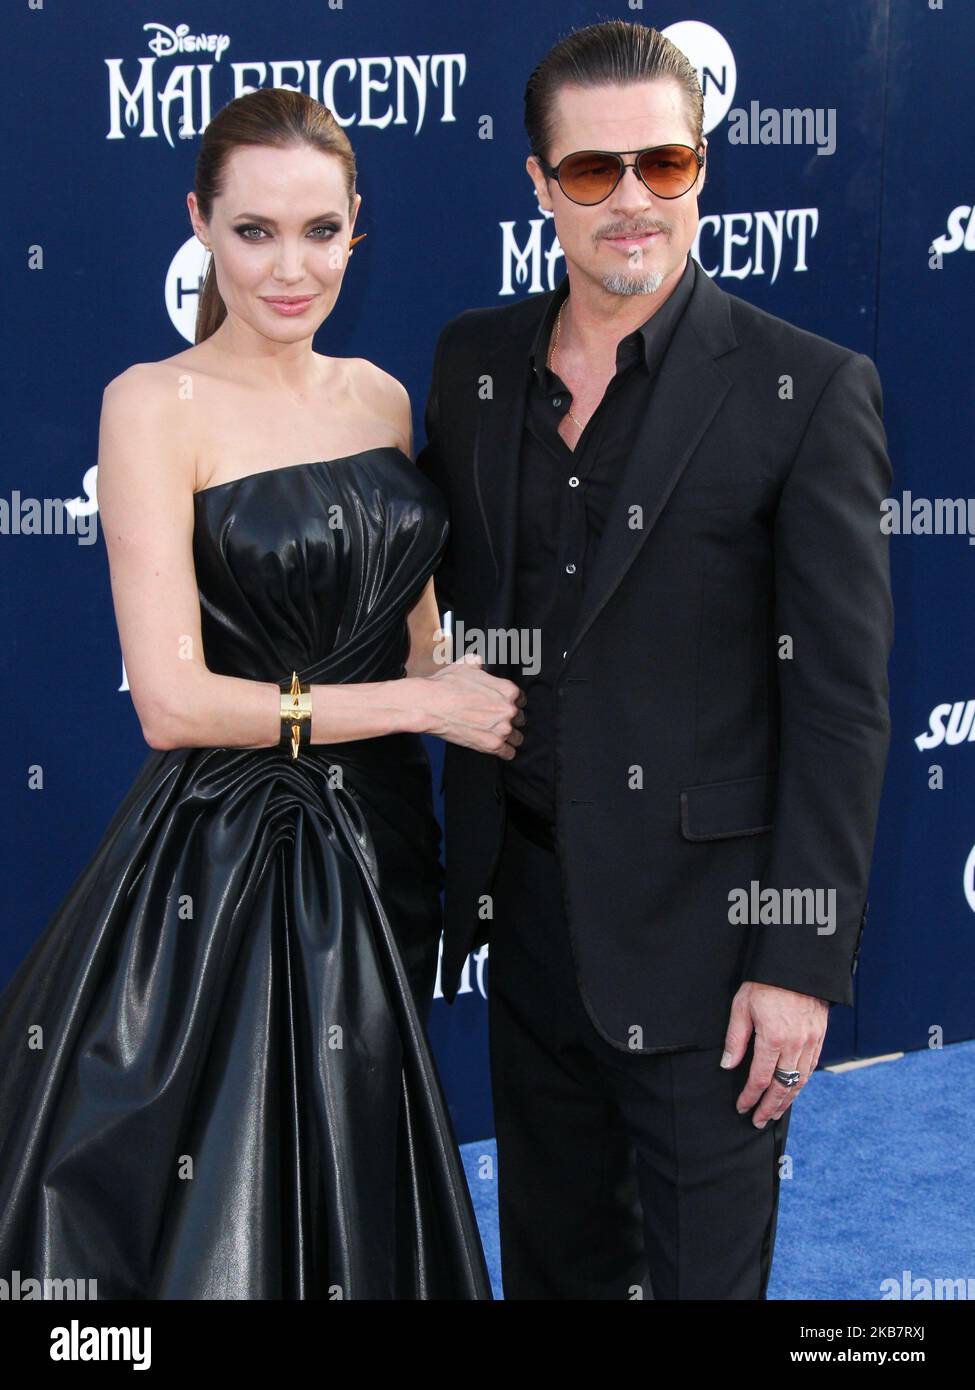 (FILE) Angelina Jolie talks Brad Pitt divorce: 'I felt a deep and genuine sadness'. HOLLYWOOD, LOS ANGELES, CALIFORNIA, USA - MAY 28: Actors Angelina Jolie Pitt (wearing Atelier Versace) and Brad Pitt (wearing Gucci) arrive at the World Premiere of Disney's 'Maleficent' held at the El Capitan Theatre on May 28, 2014 in Hollywood, Los Angeles, California, United States. (Photo by Xavier Collin/Image Press Agency/NurPhoto) Stock Photo